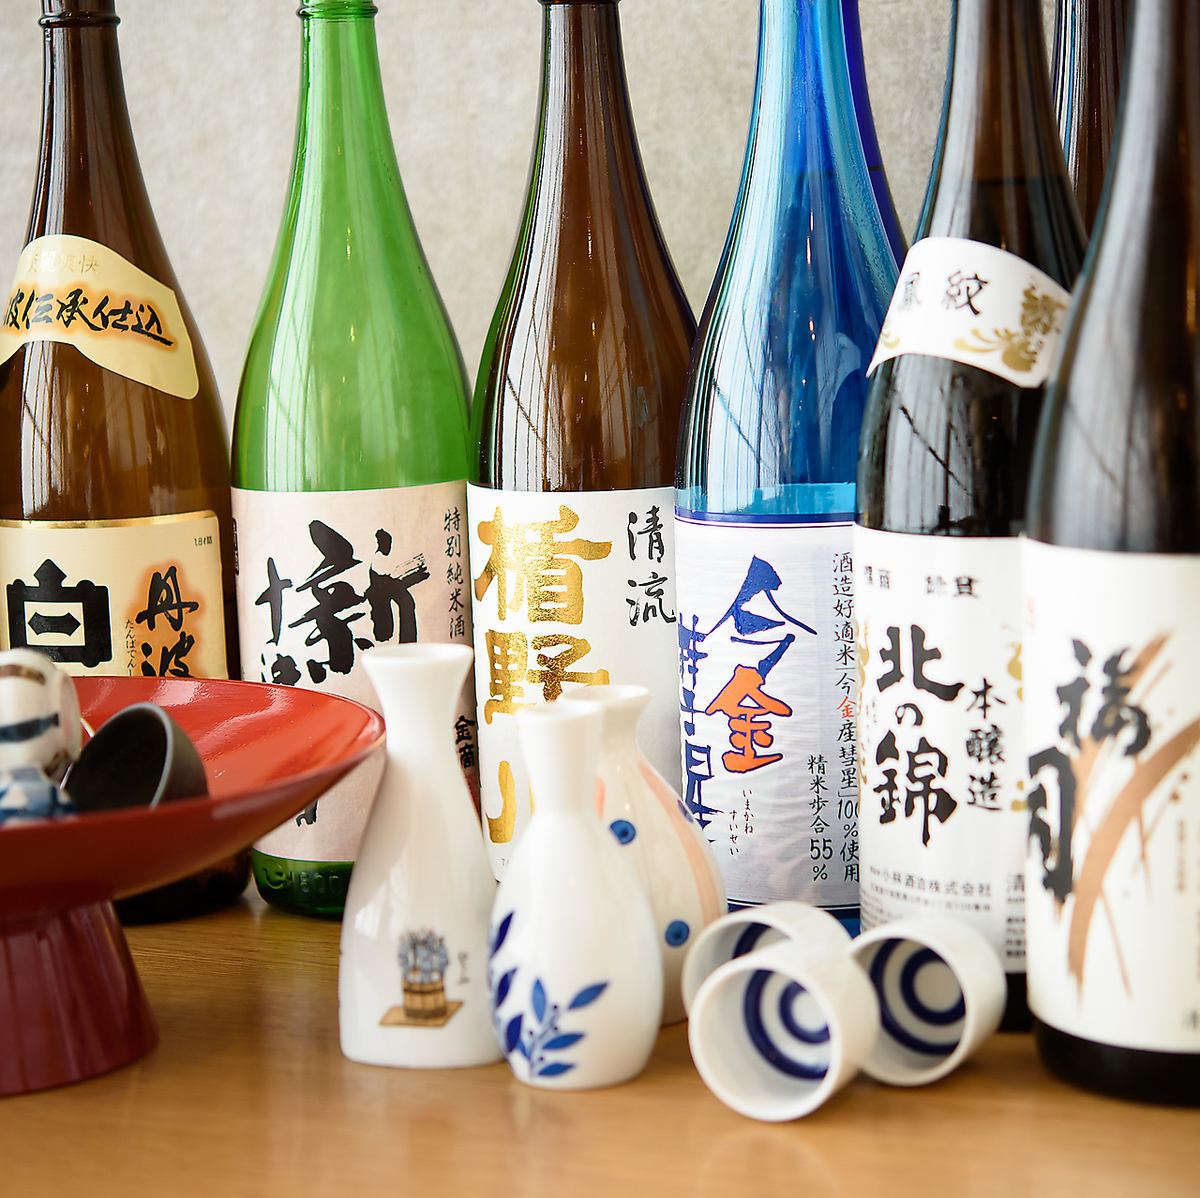 We offer a wide variety of sake carefully selected by our sake masters.